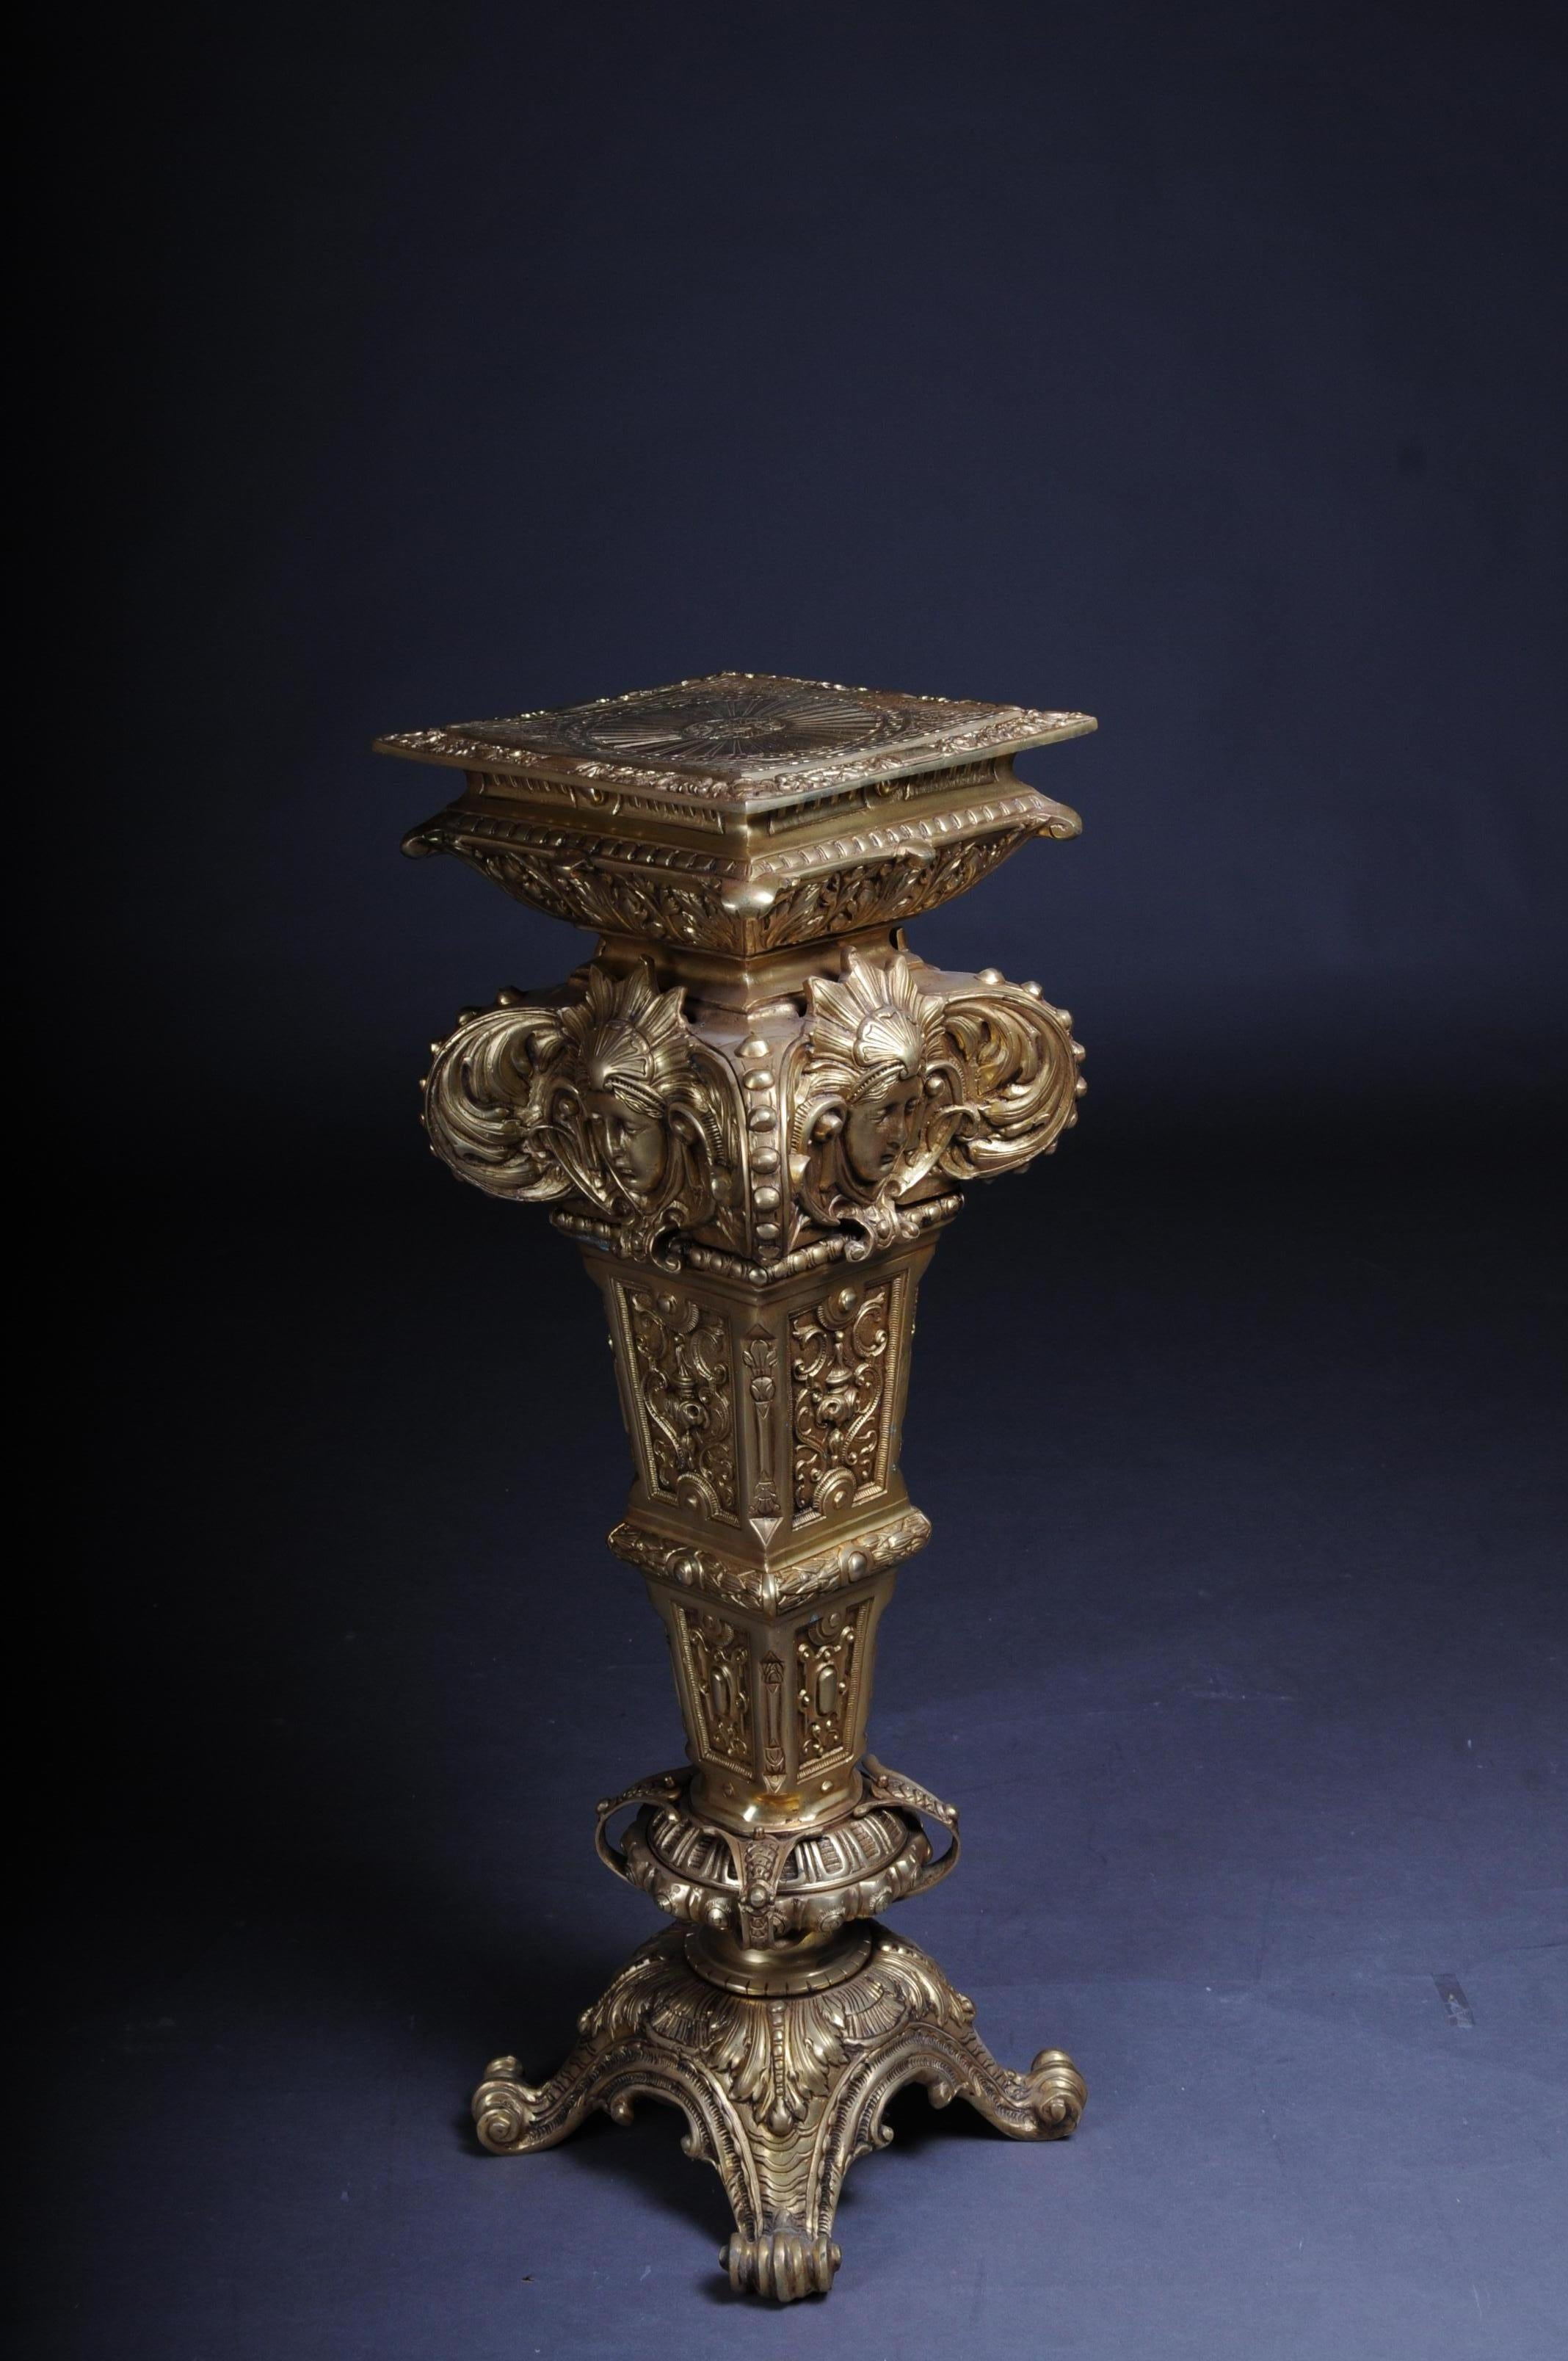 Massive finely engraved bronze casting. With richly structured, strongly ornamented. Ending the pillar on four volute-shaped legs. Under the doubly stepped, finely chiselled cover plate are all-round, fully plastic female masks. Very difficult and